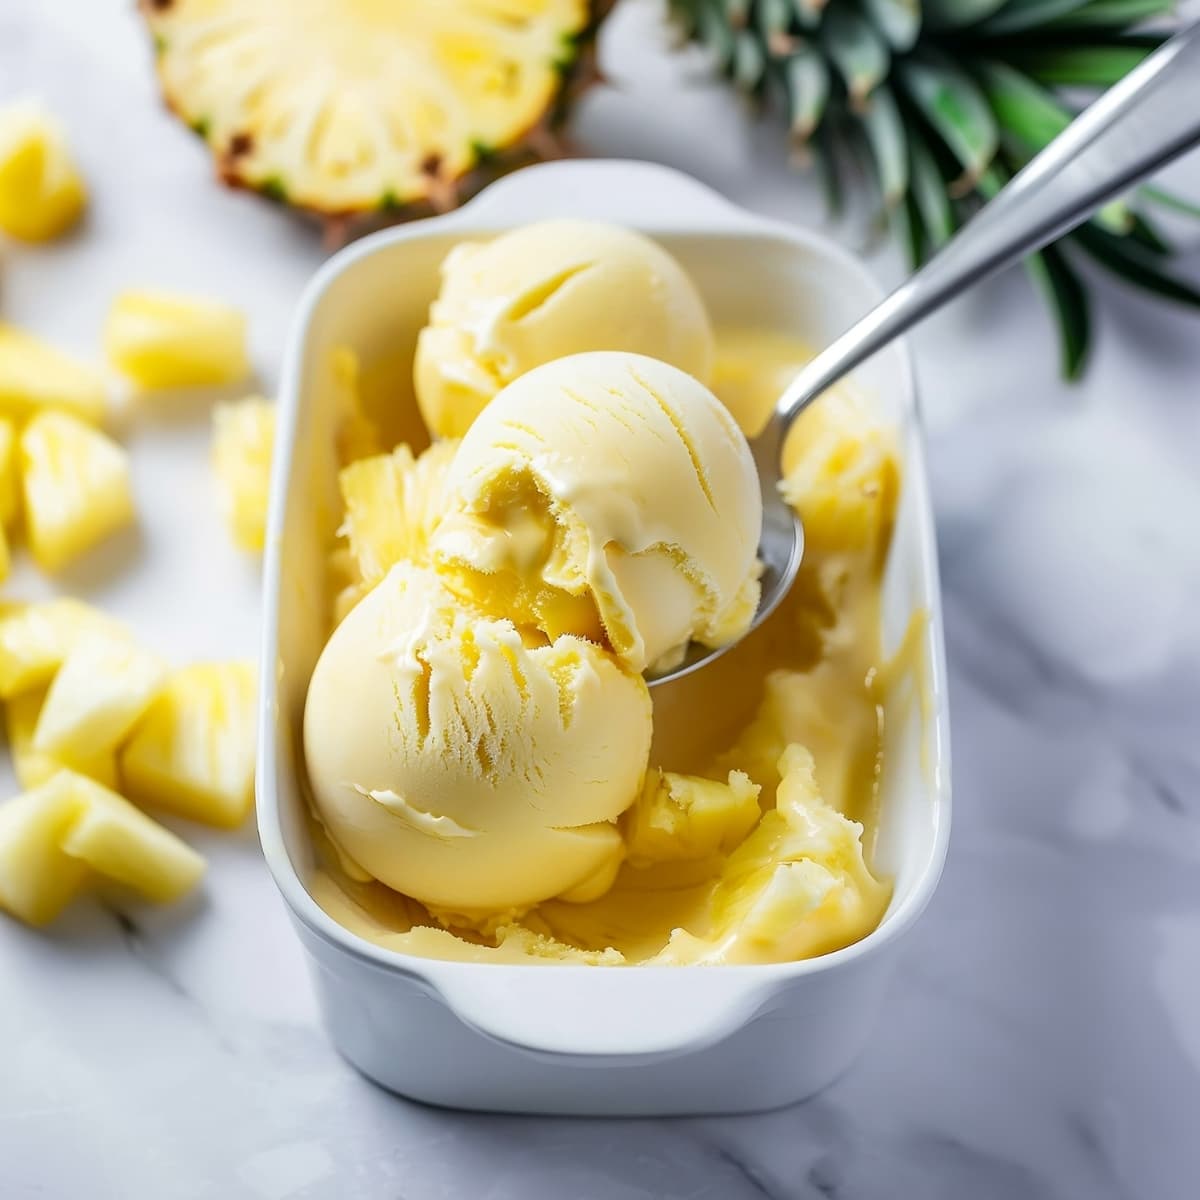 Scoops of pineapple sorbet in a white container